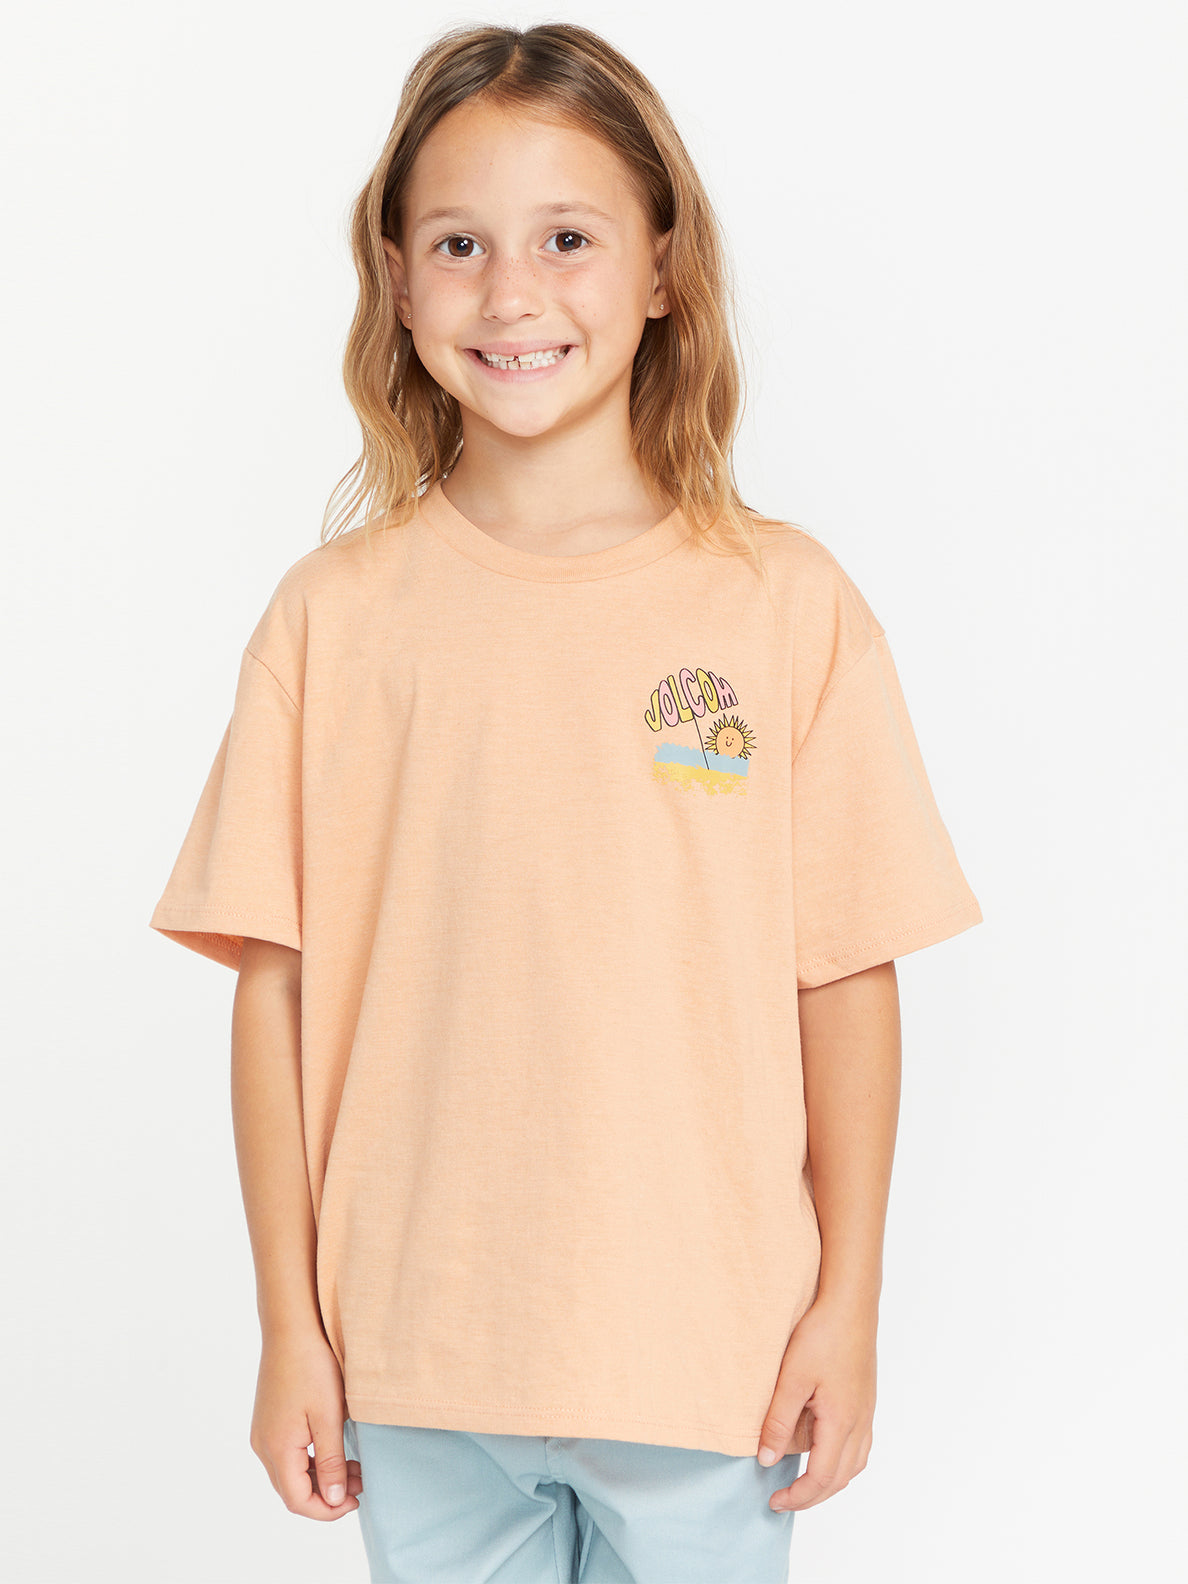 Girls Truly Stoked Boyfriend Tee - Clay (R3532302_CLY) [1]